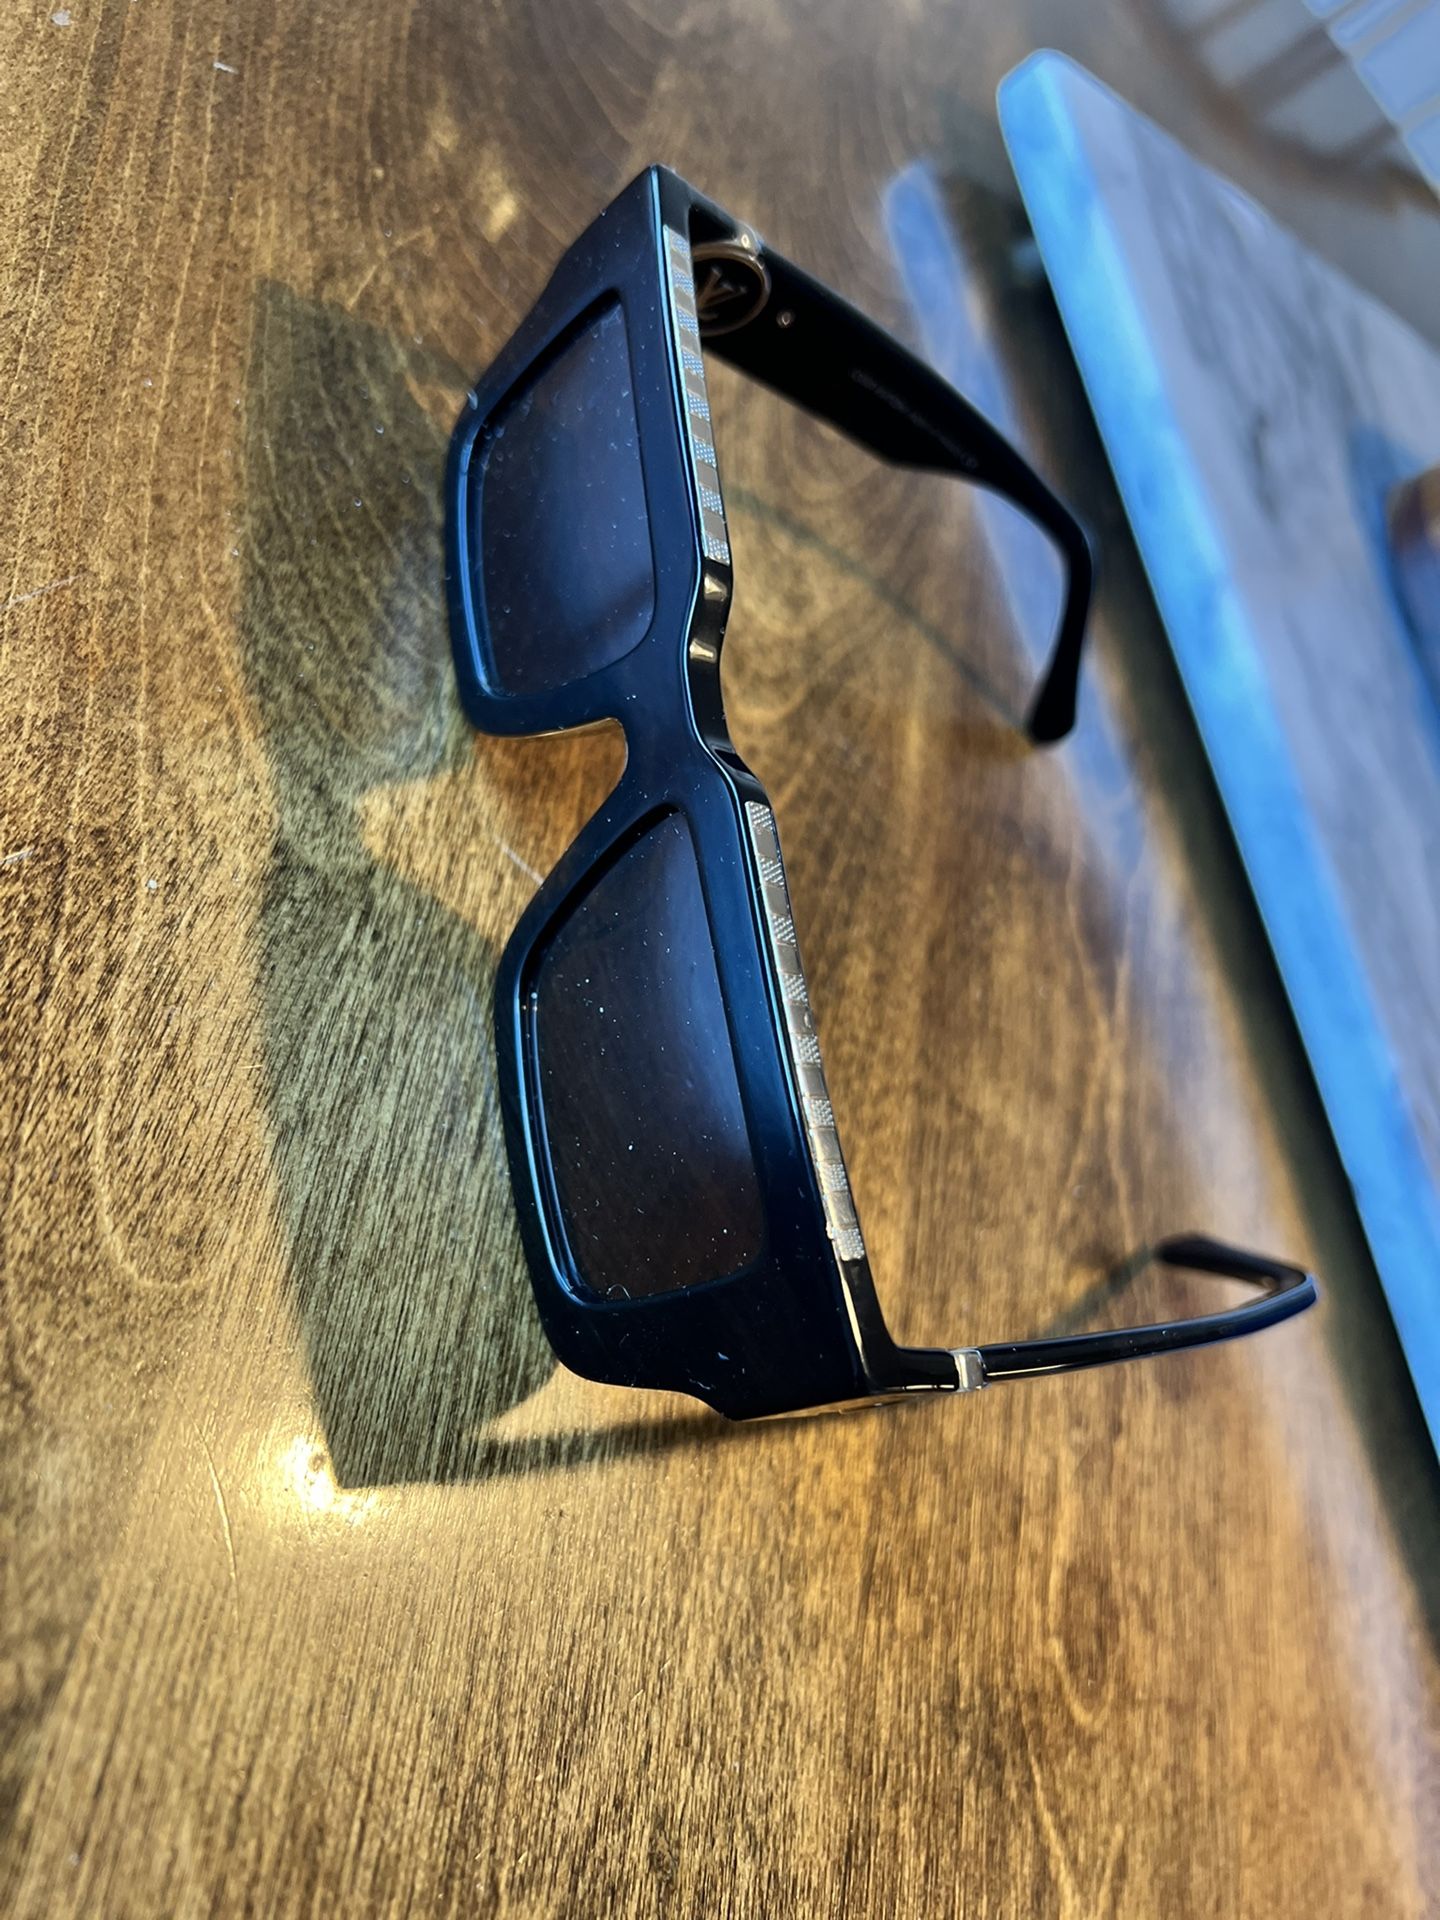 LV Clash Square Sunglasses. New for Sale in The Bronx, NY - OfferUp